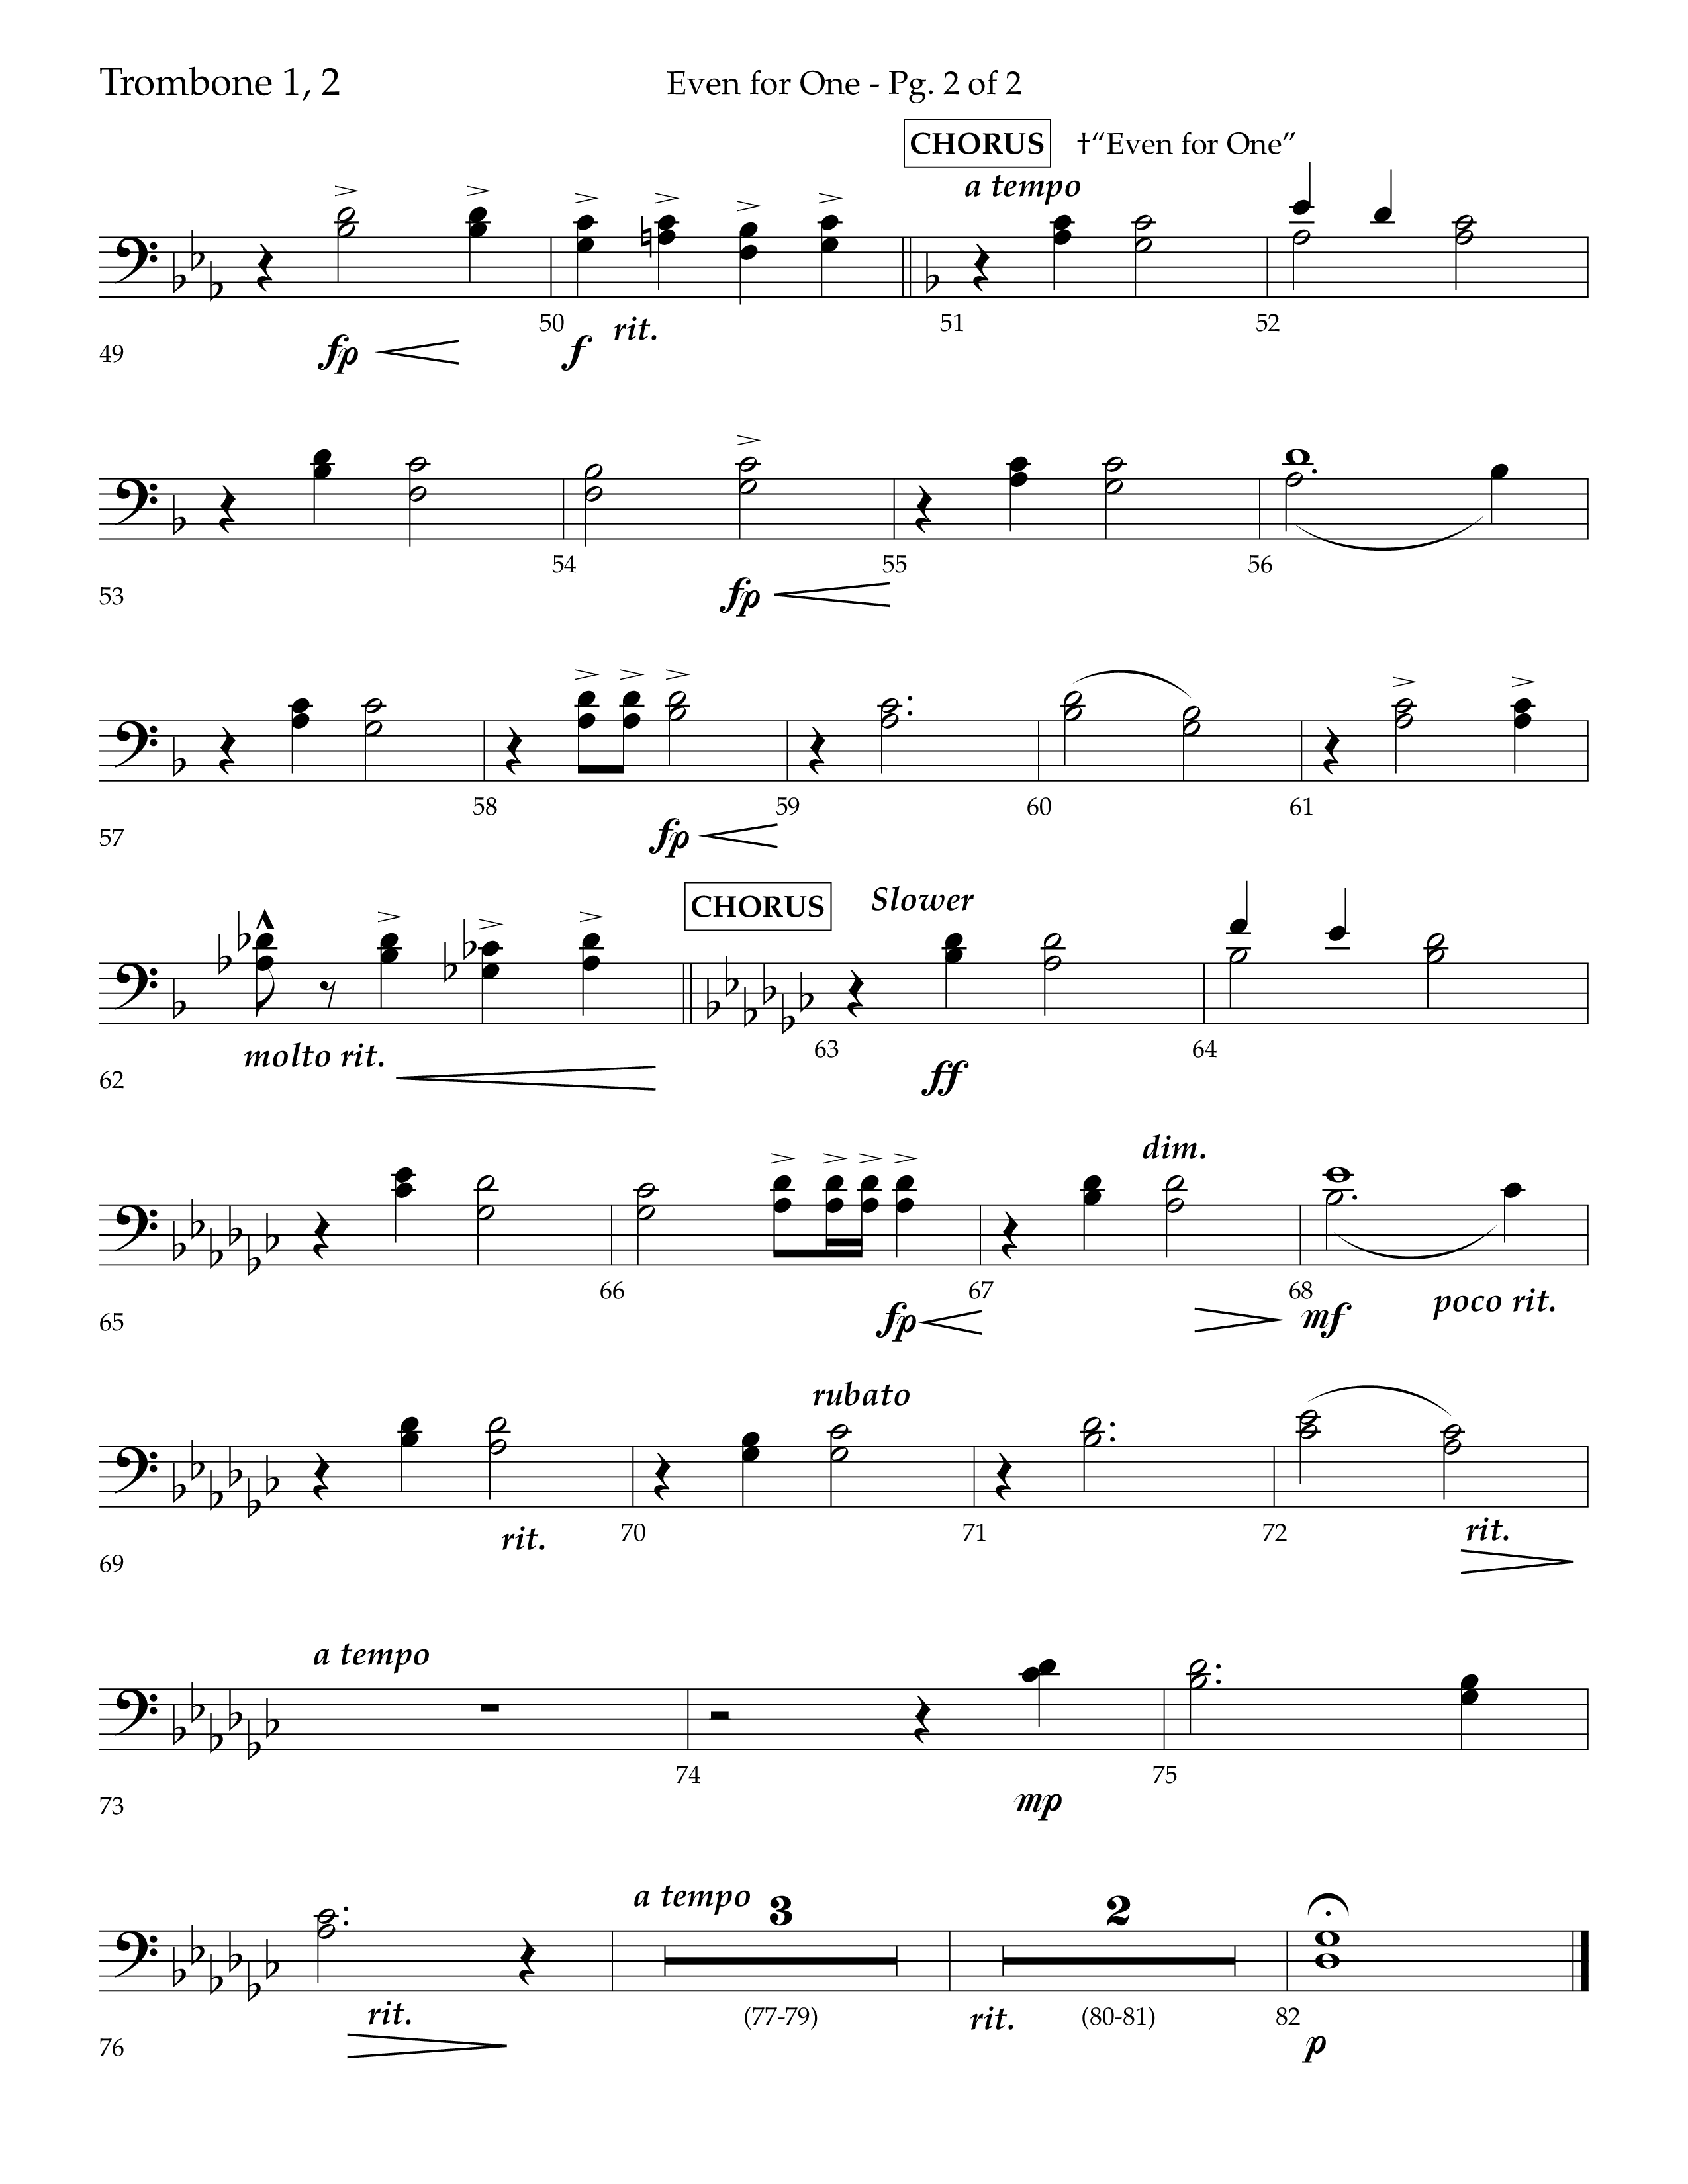 Even For One (Choral Anthem SATB) Trombone 1/2 (Lifeway Choral / Arr. Marty Hamby)